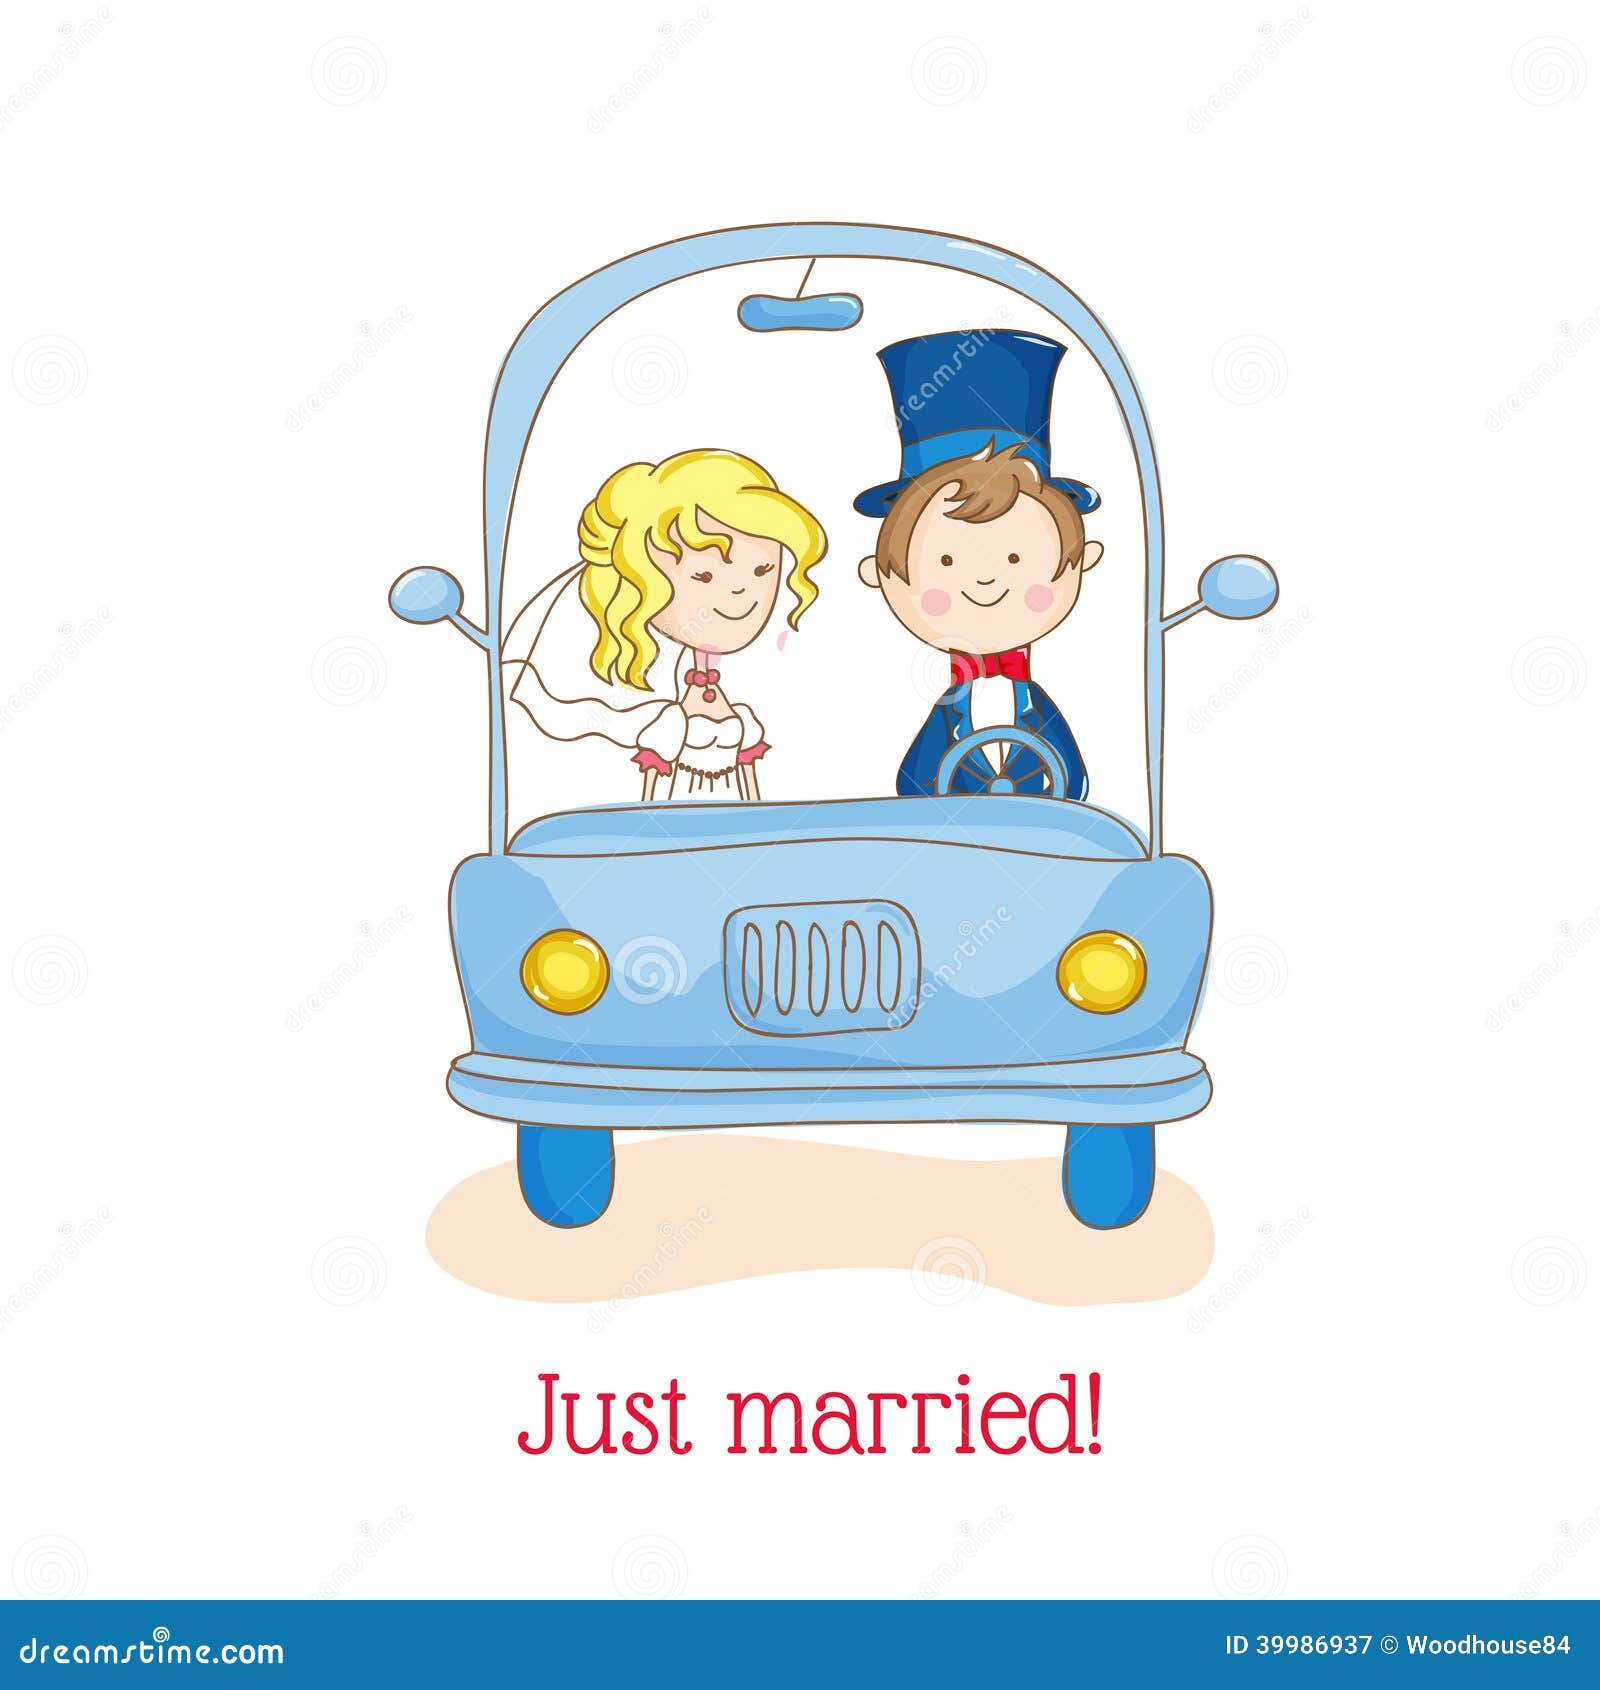 free clipart just married car - photo #48